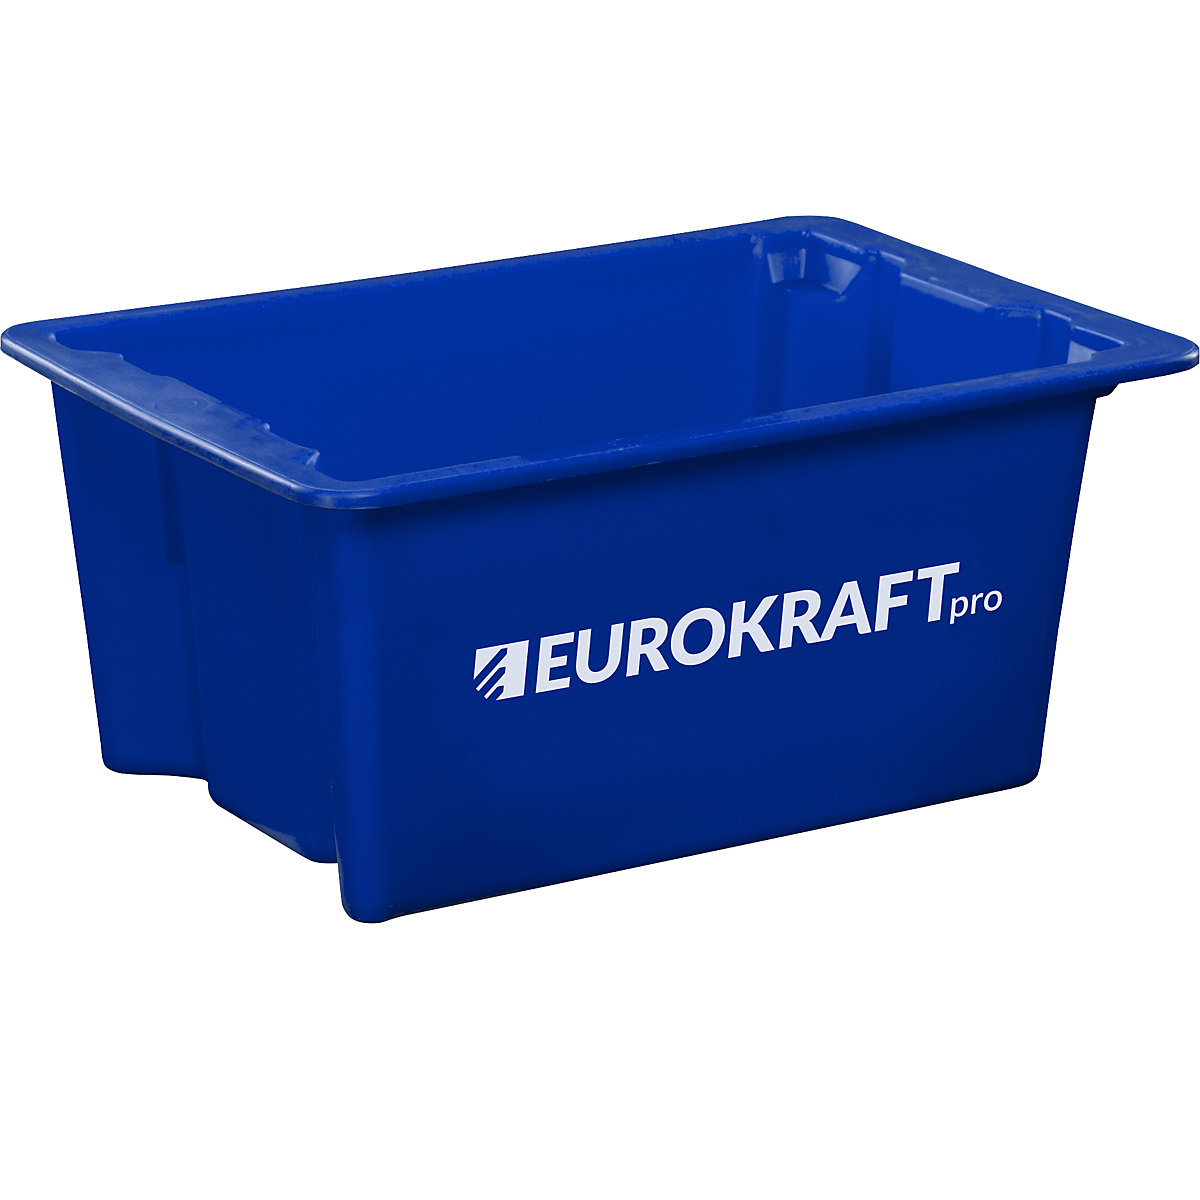 EUROKRAFTpro – Stack/nest container made of polypropylene suitable for foodstuffs, 6 l capacity, pack of 4, solid walls and base, blue